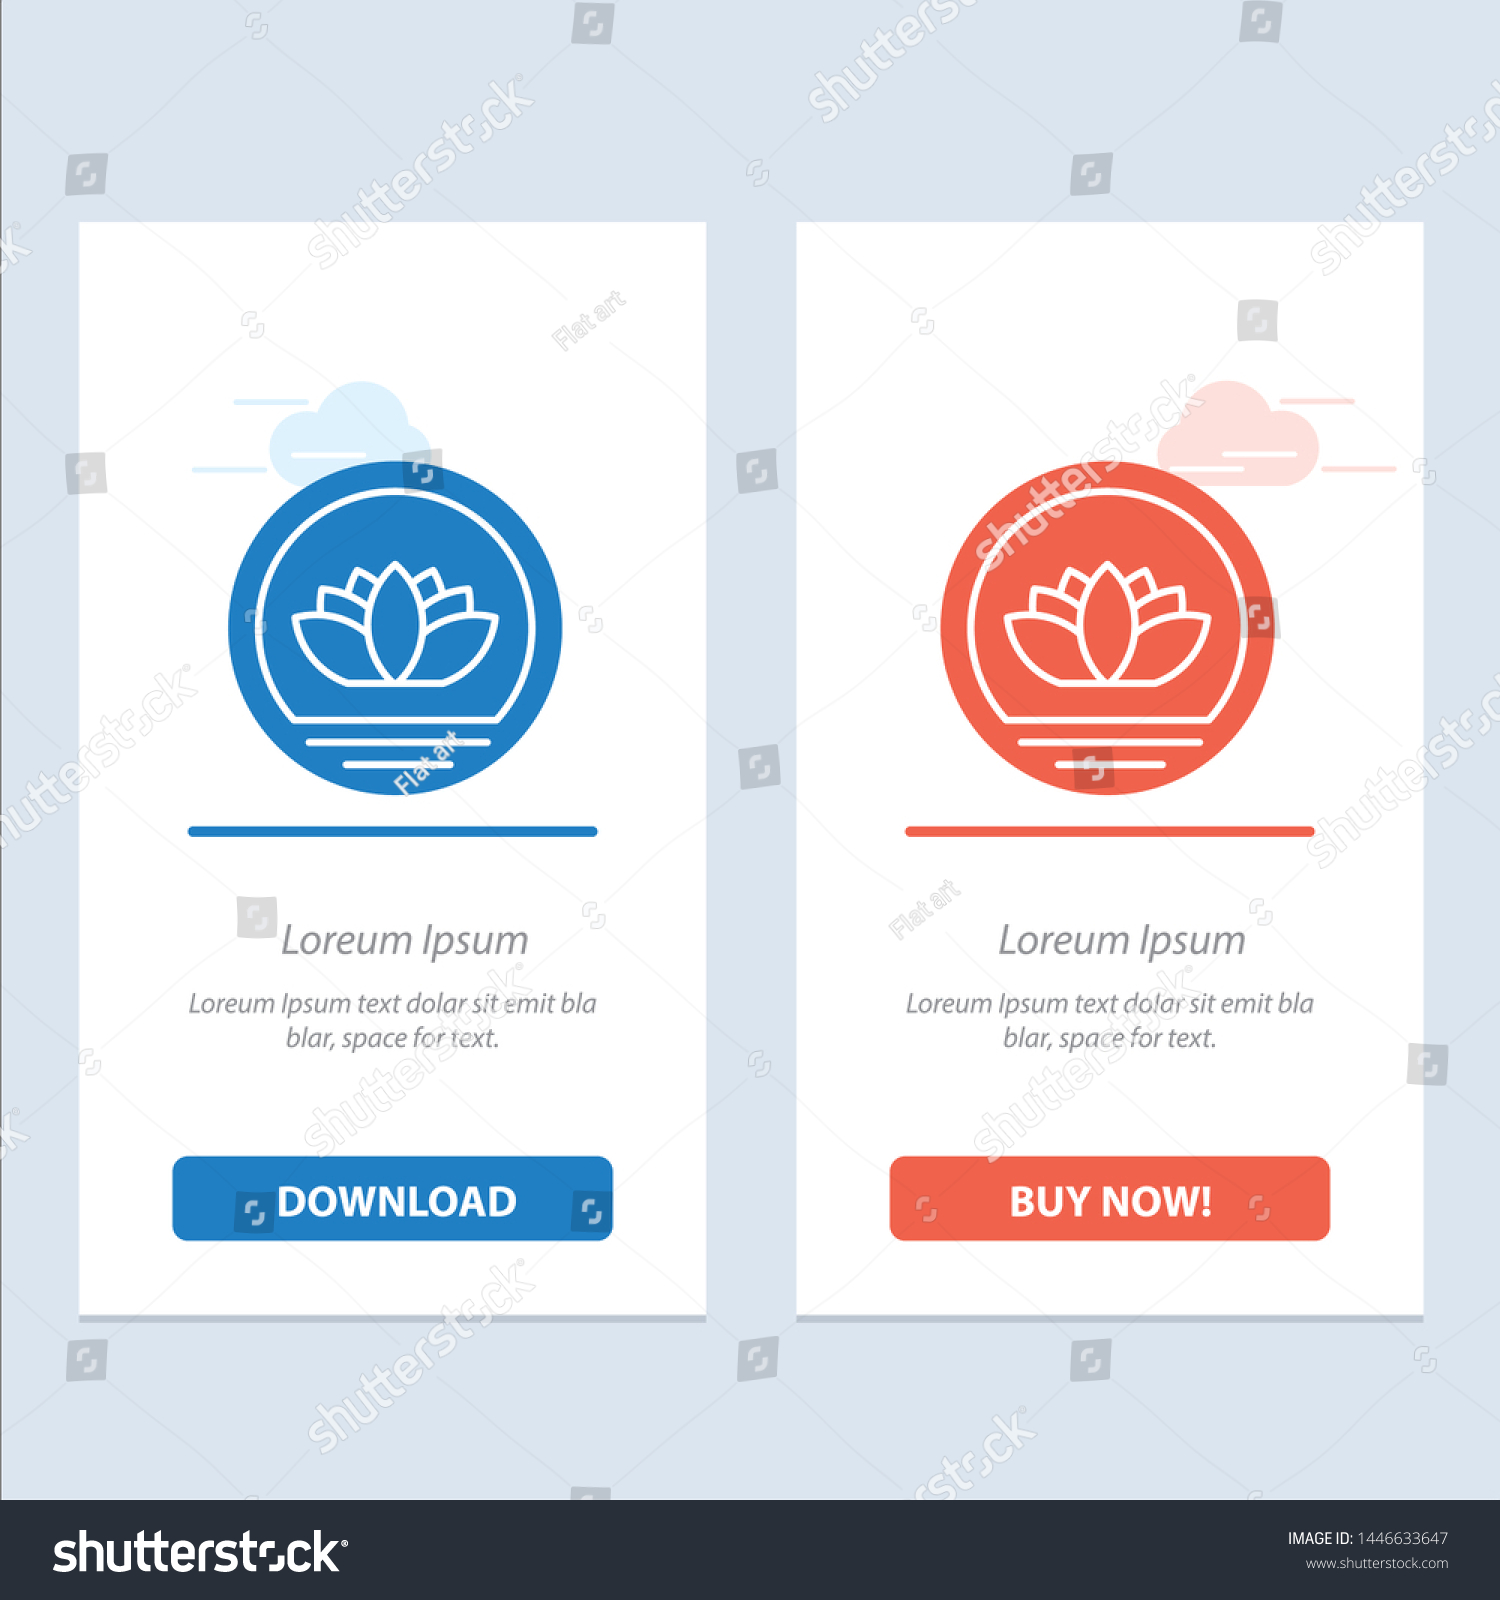 SVG of Bangladesh, Bangladeshi, Coin, Coins  Blue and Red Download and Buy Now web Widget Card Template svg